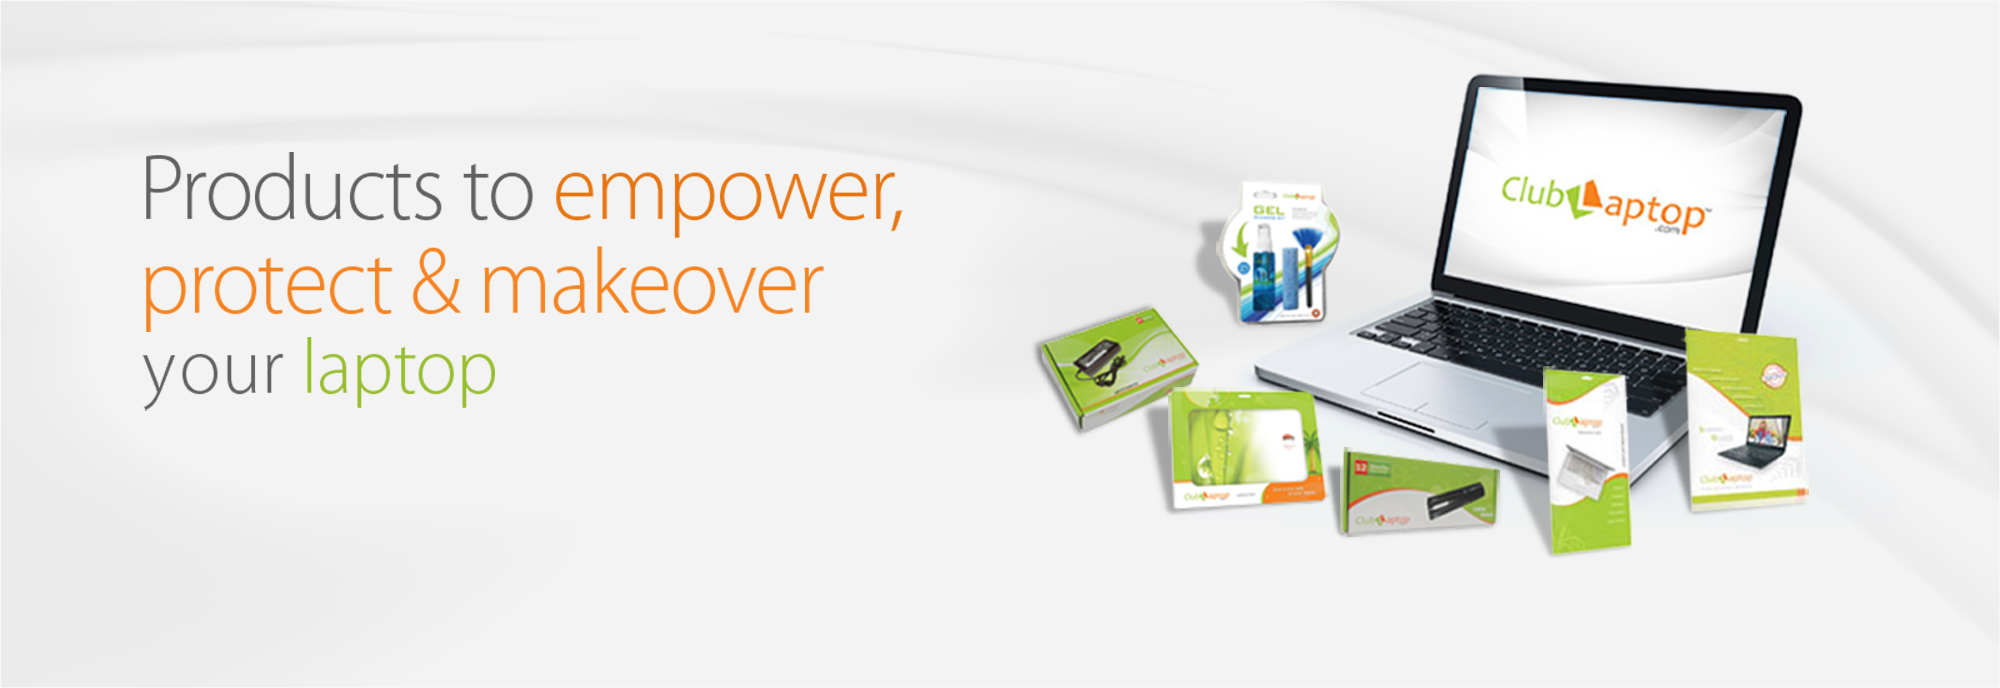 Clublaptop products to empower protect & makeover your laptop